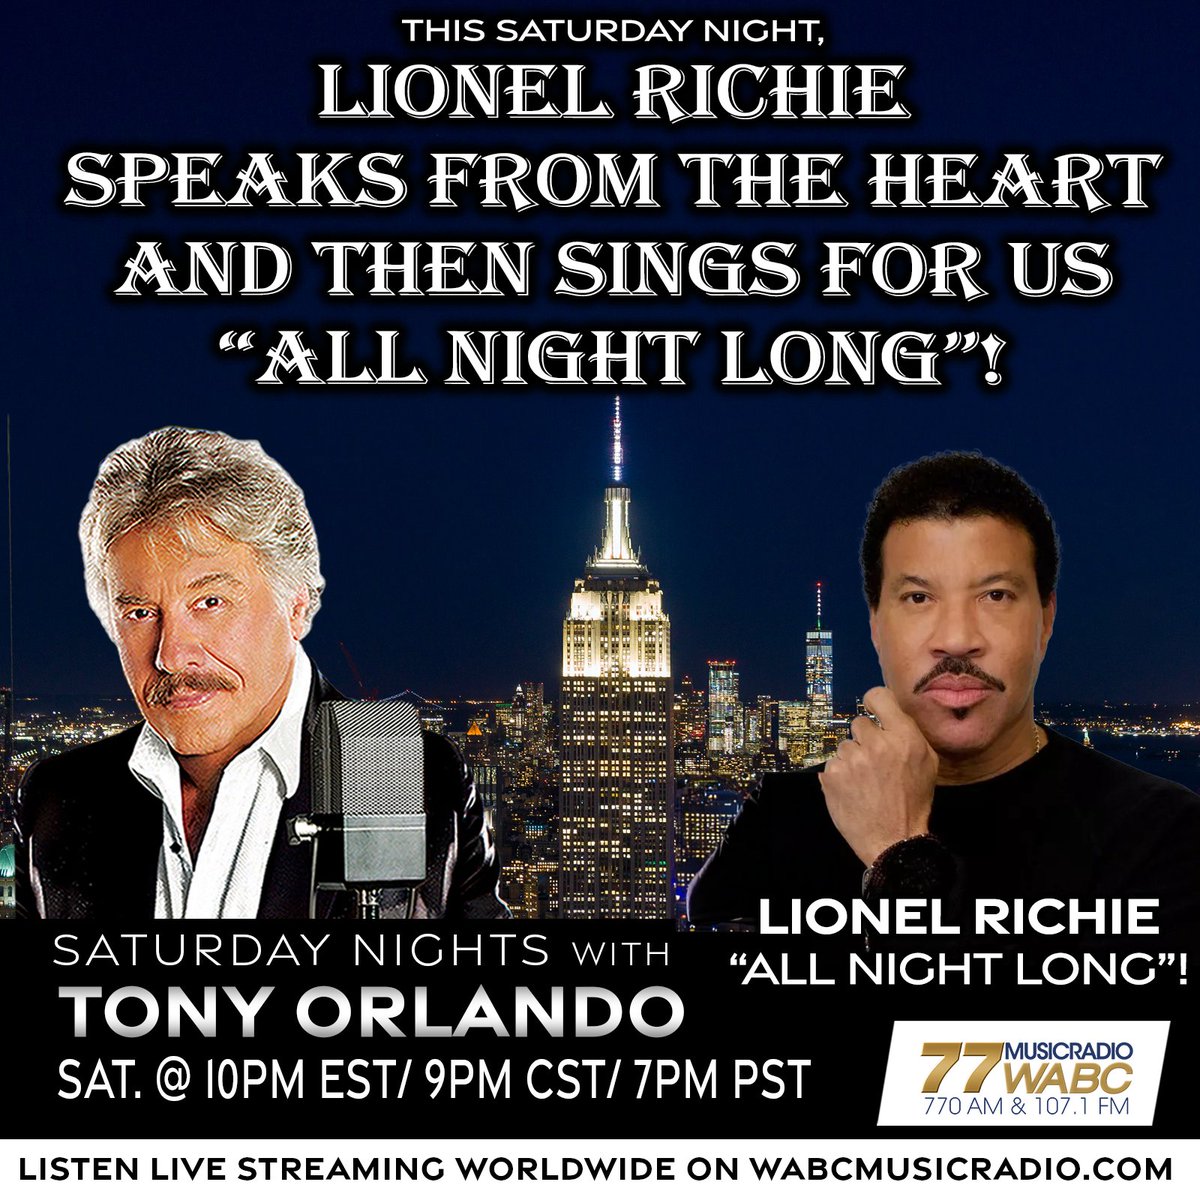 TOMORROW at 10PM: Lionel Richie Speaks From The Heart Host @TonyOrlando plays the hits with @LionelRichie 'All Night Long!' Join us TOMORROW from 10PM-midnight on wabcmusicradio.com, 770 AM, or on the 77 WABC app! #77WABCRadio #Music #TonyOrlando